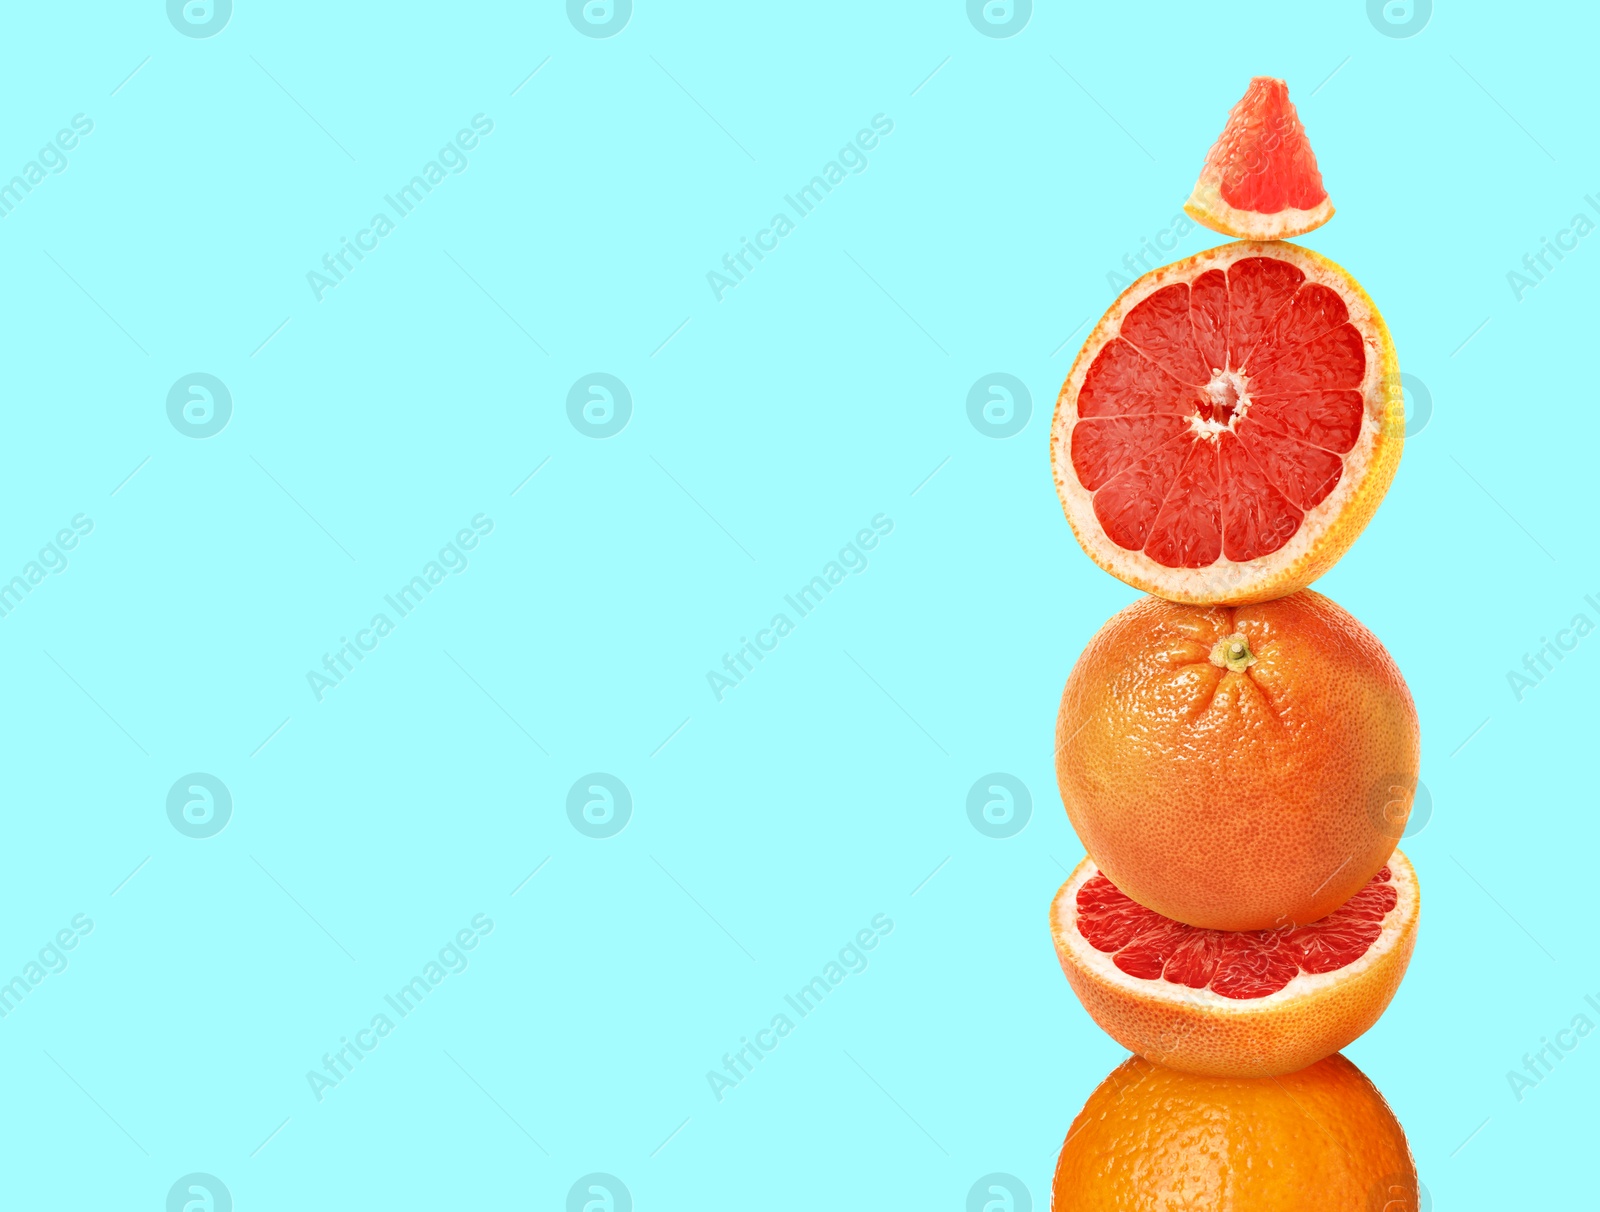 Image of Stacked cut and whole grapefruits on light blue background, space for text